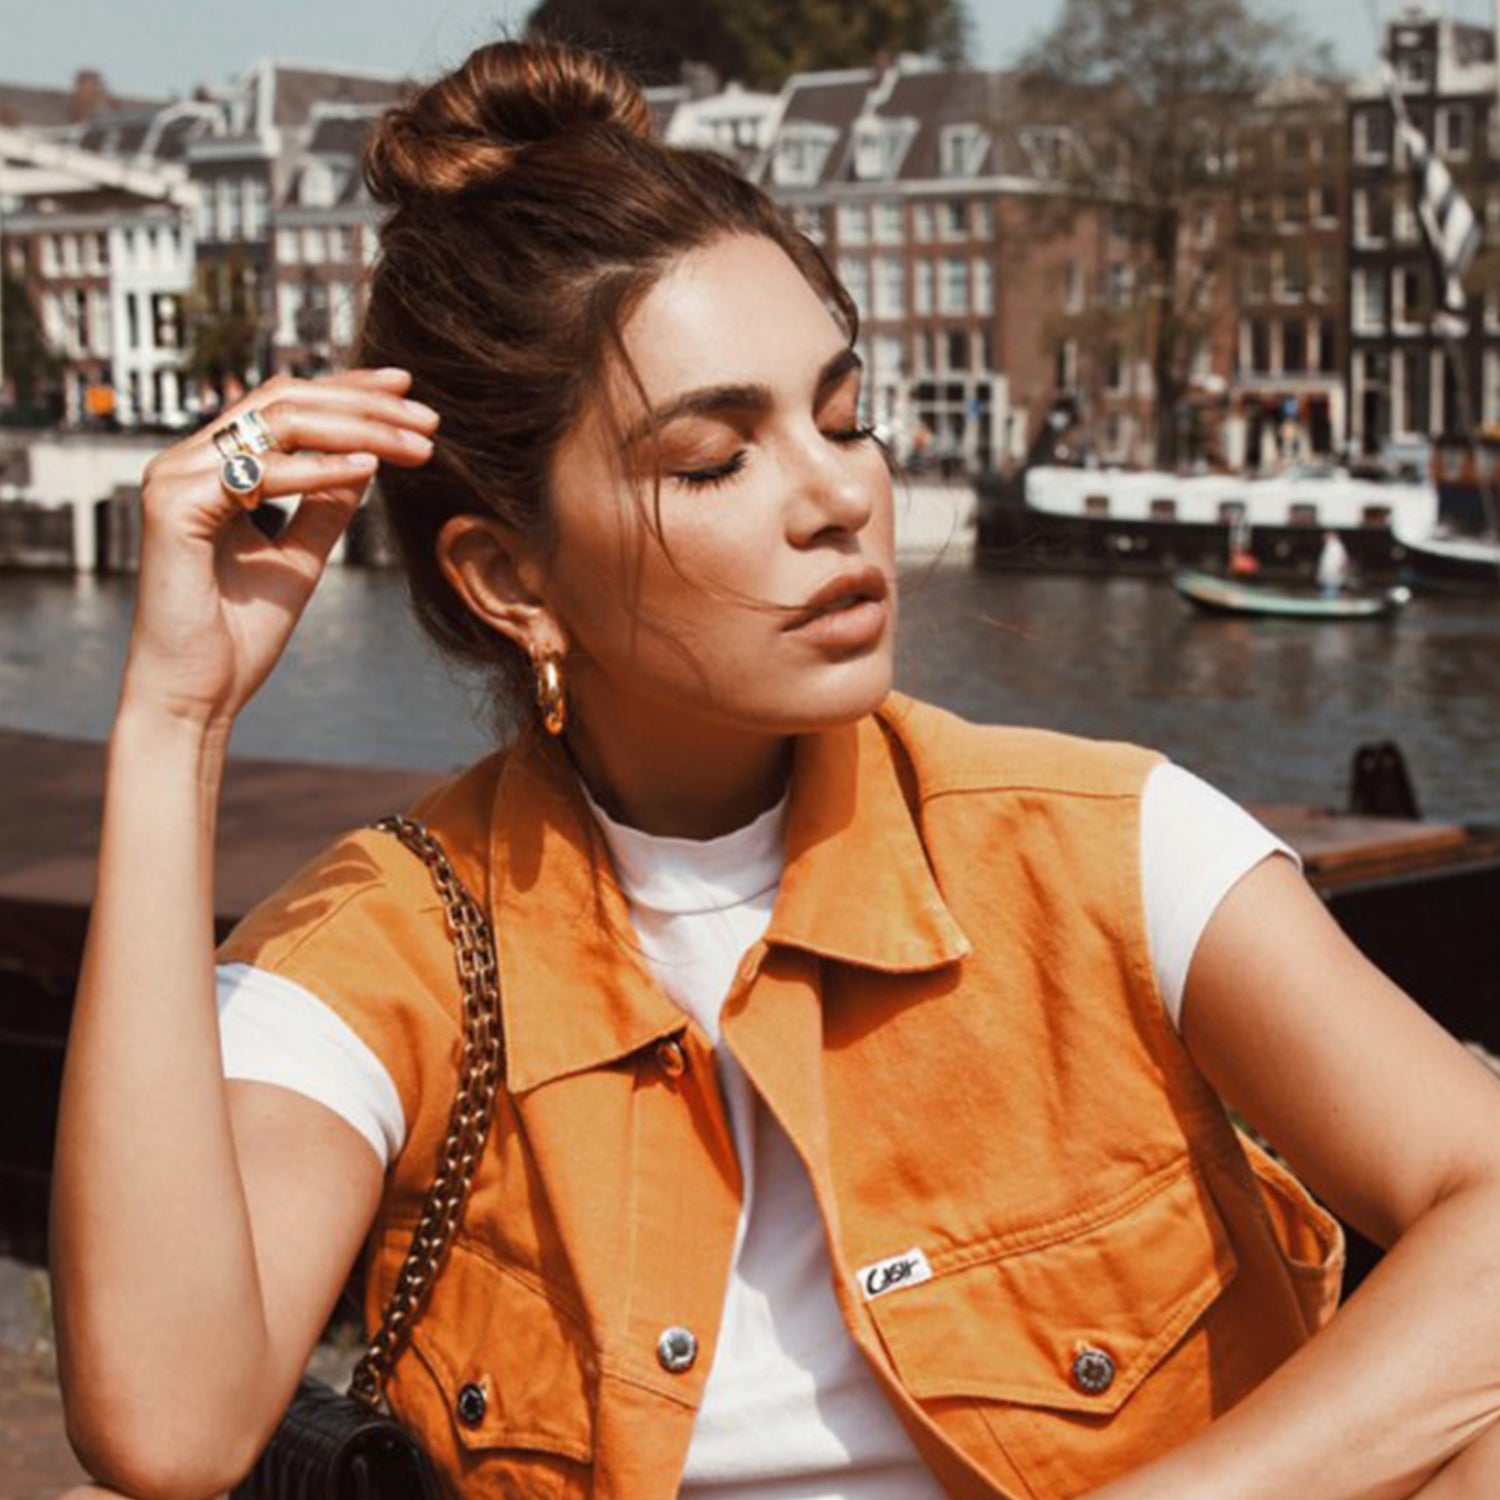 Negin Mirsalehi shown in the 3cm Tube Hoops in Yellow Gold